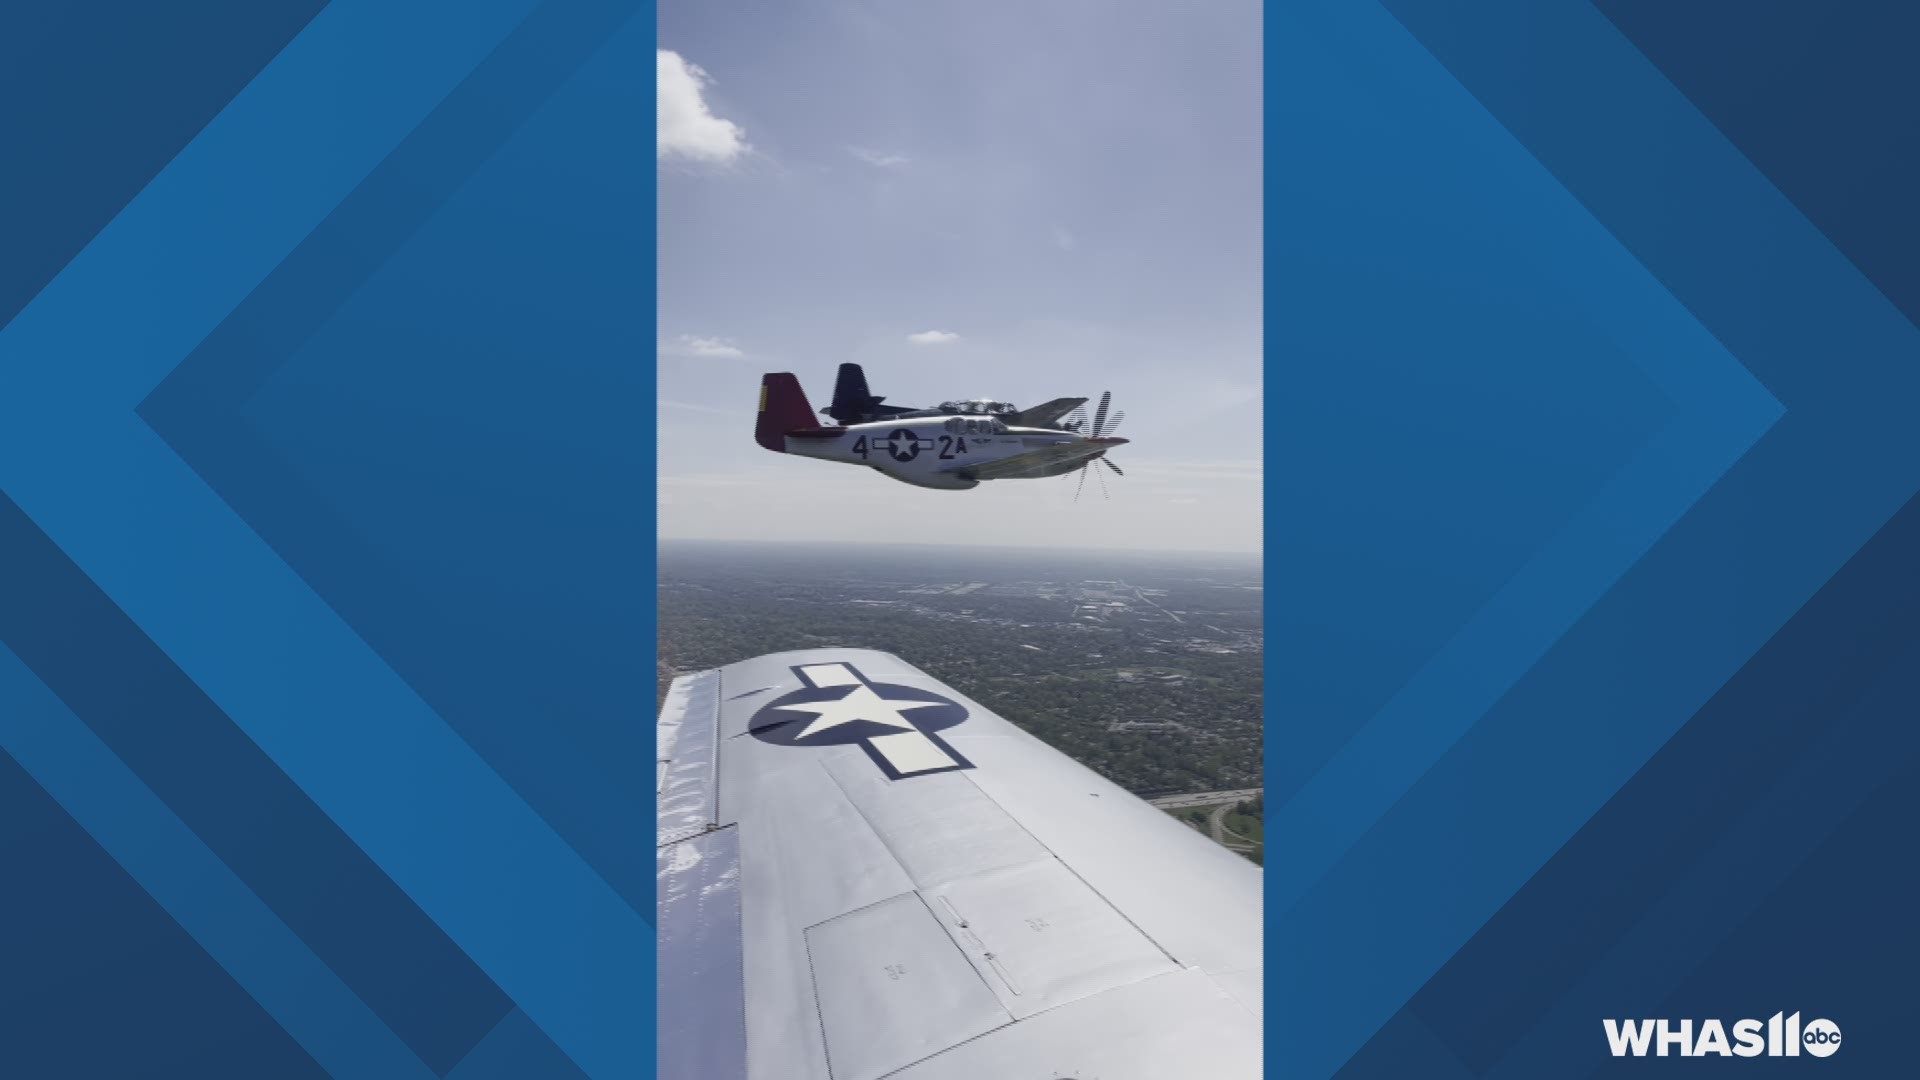 Saturday this plane is going to be flying in thunder over Louisville, but Friday afternoon two World War II veterans are getting to ride it first.